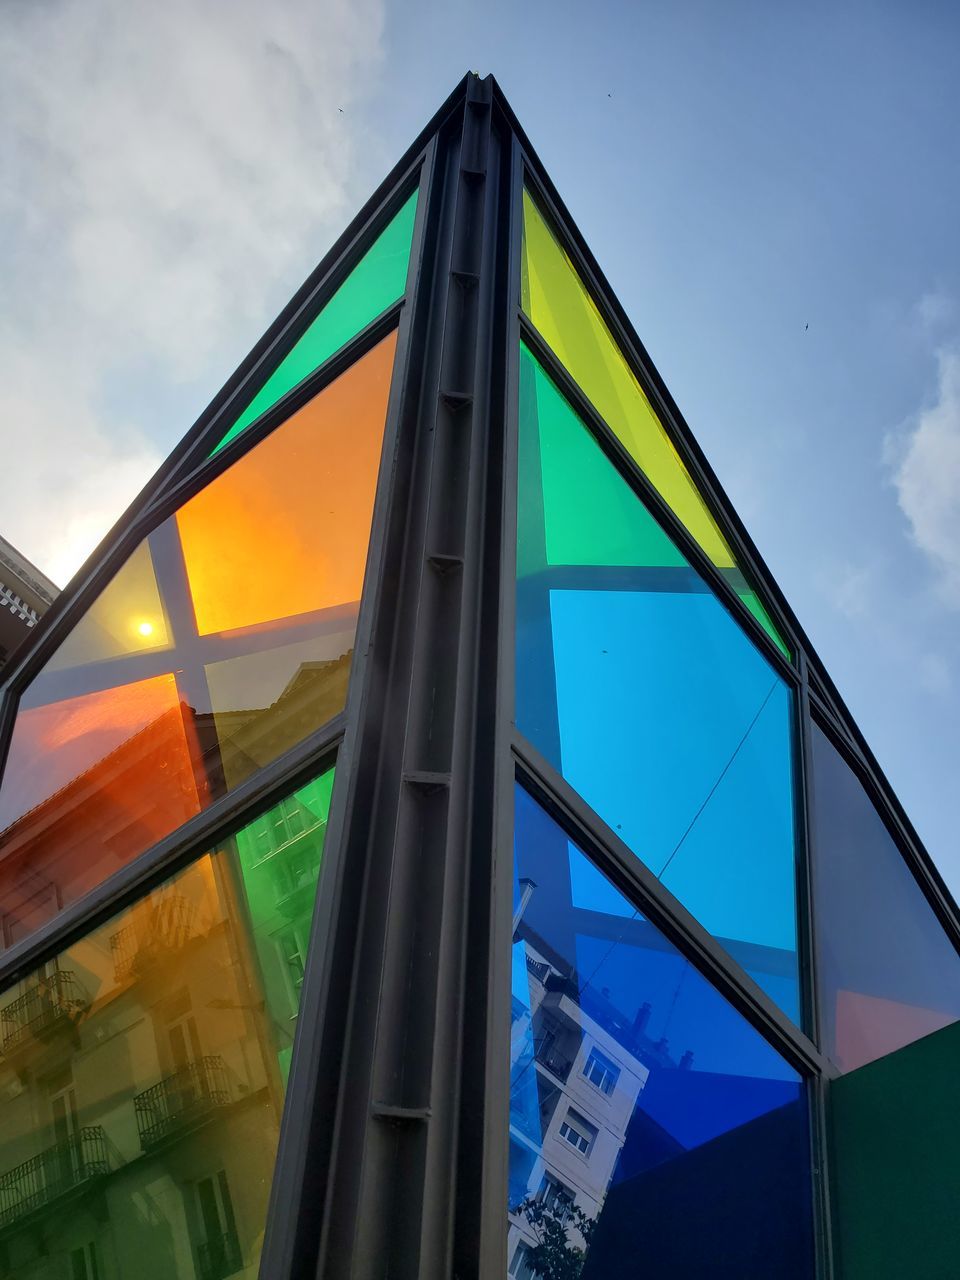 LOW ANGLE VIEW OF GLASS BUILDING WITH REFLECTION